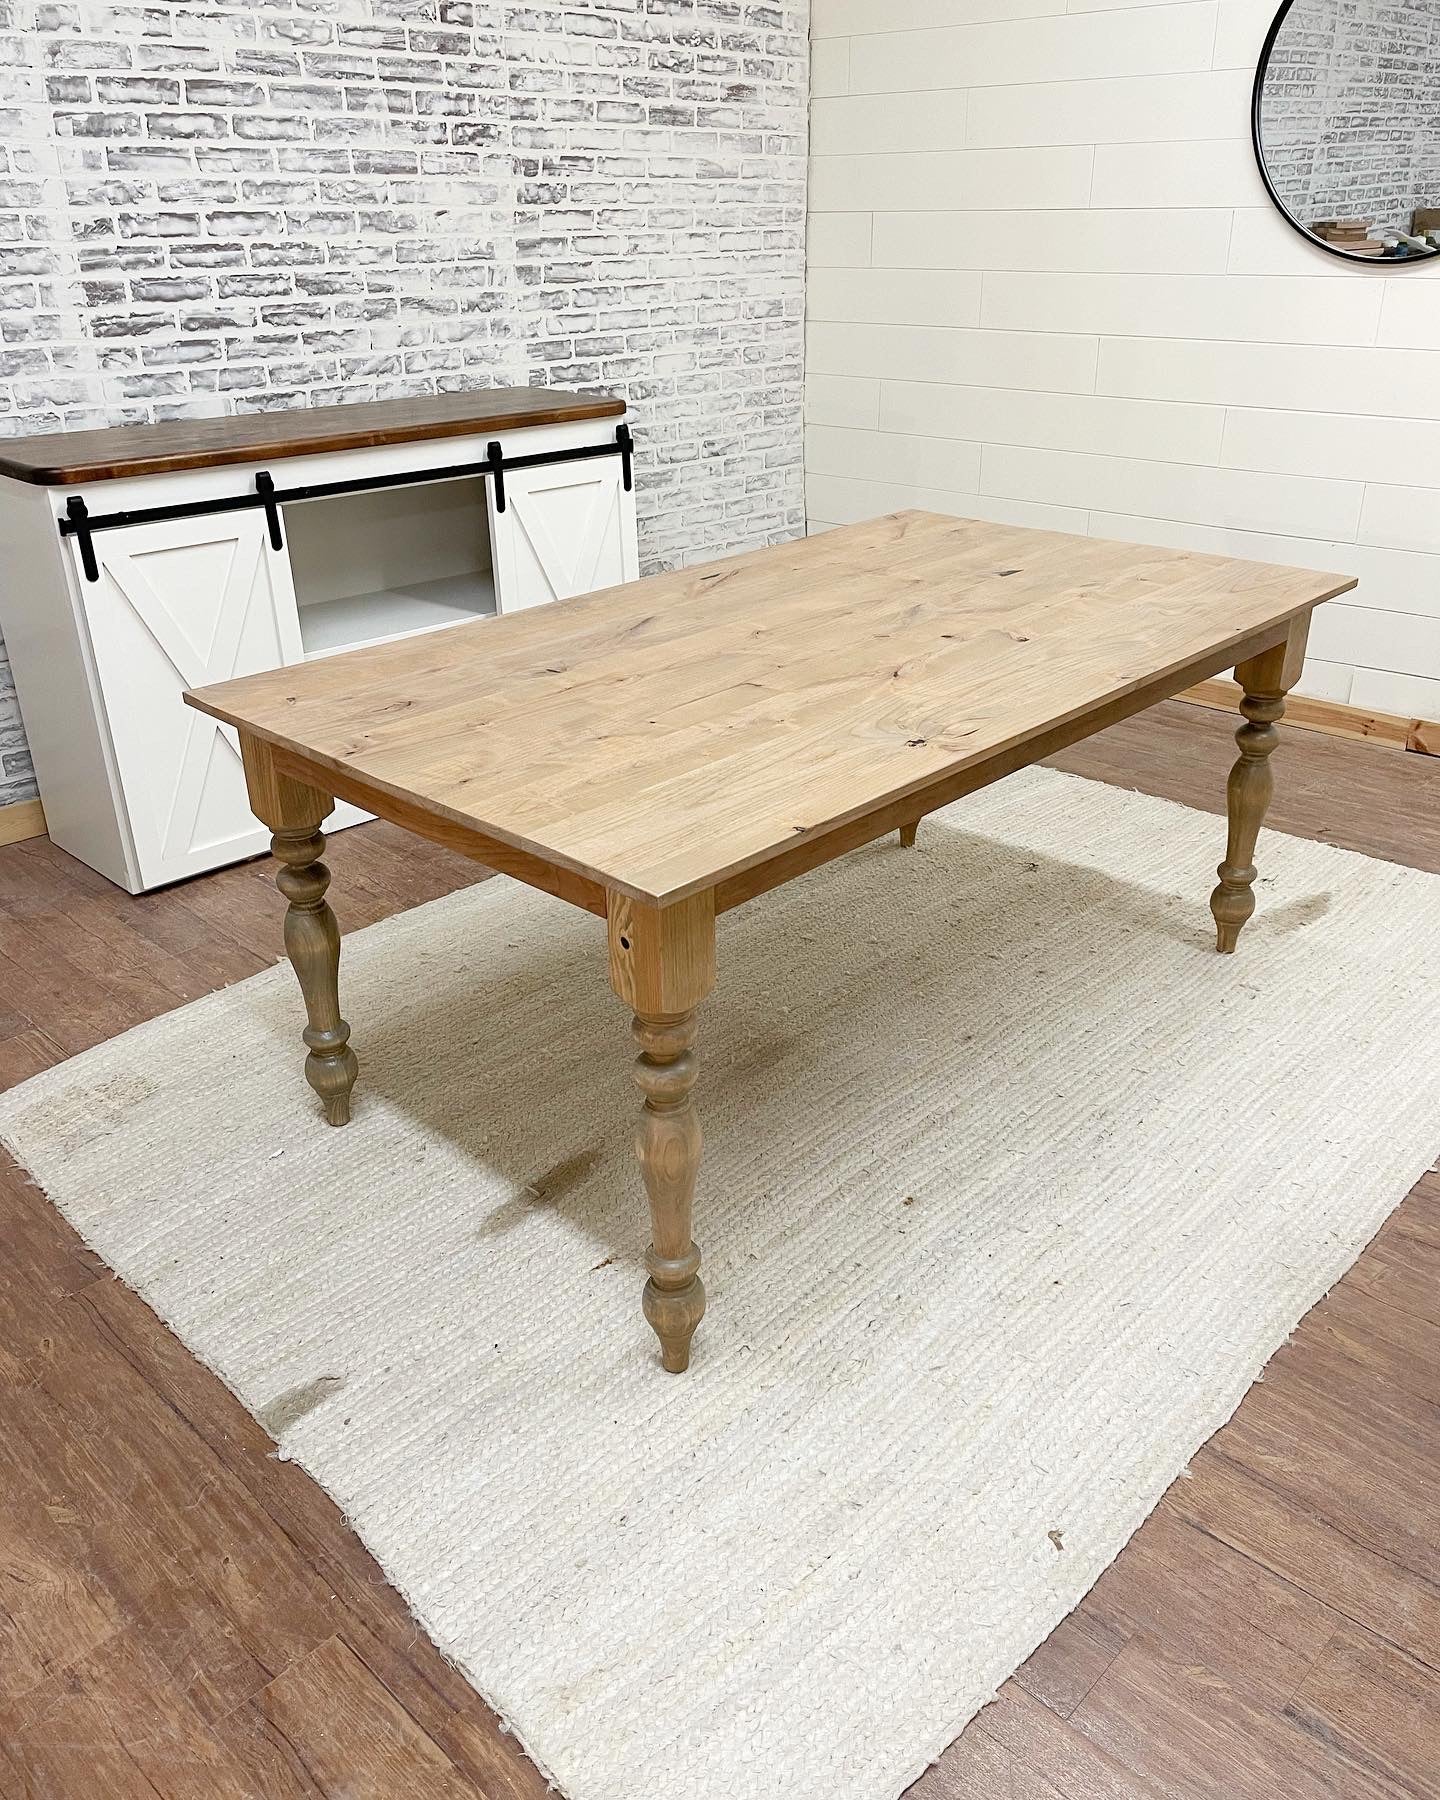 Pictured with a 6' L x 42" W Rustic Alder Top with Pine Legs stained Weathered Oak. Pictured with a 5' L x 34.5" T x 18" D Sliding Barn Door Console with Red Oak Top stained Espresso and  White painted base.